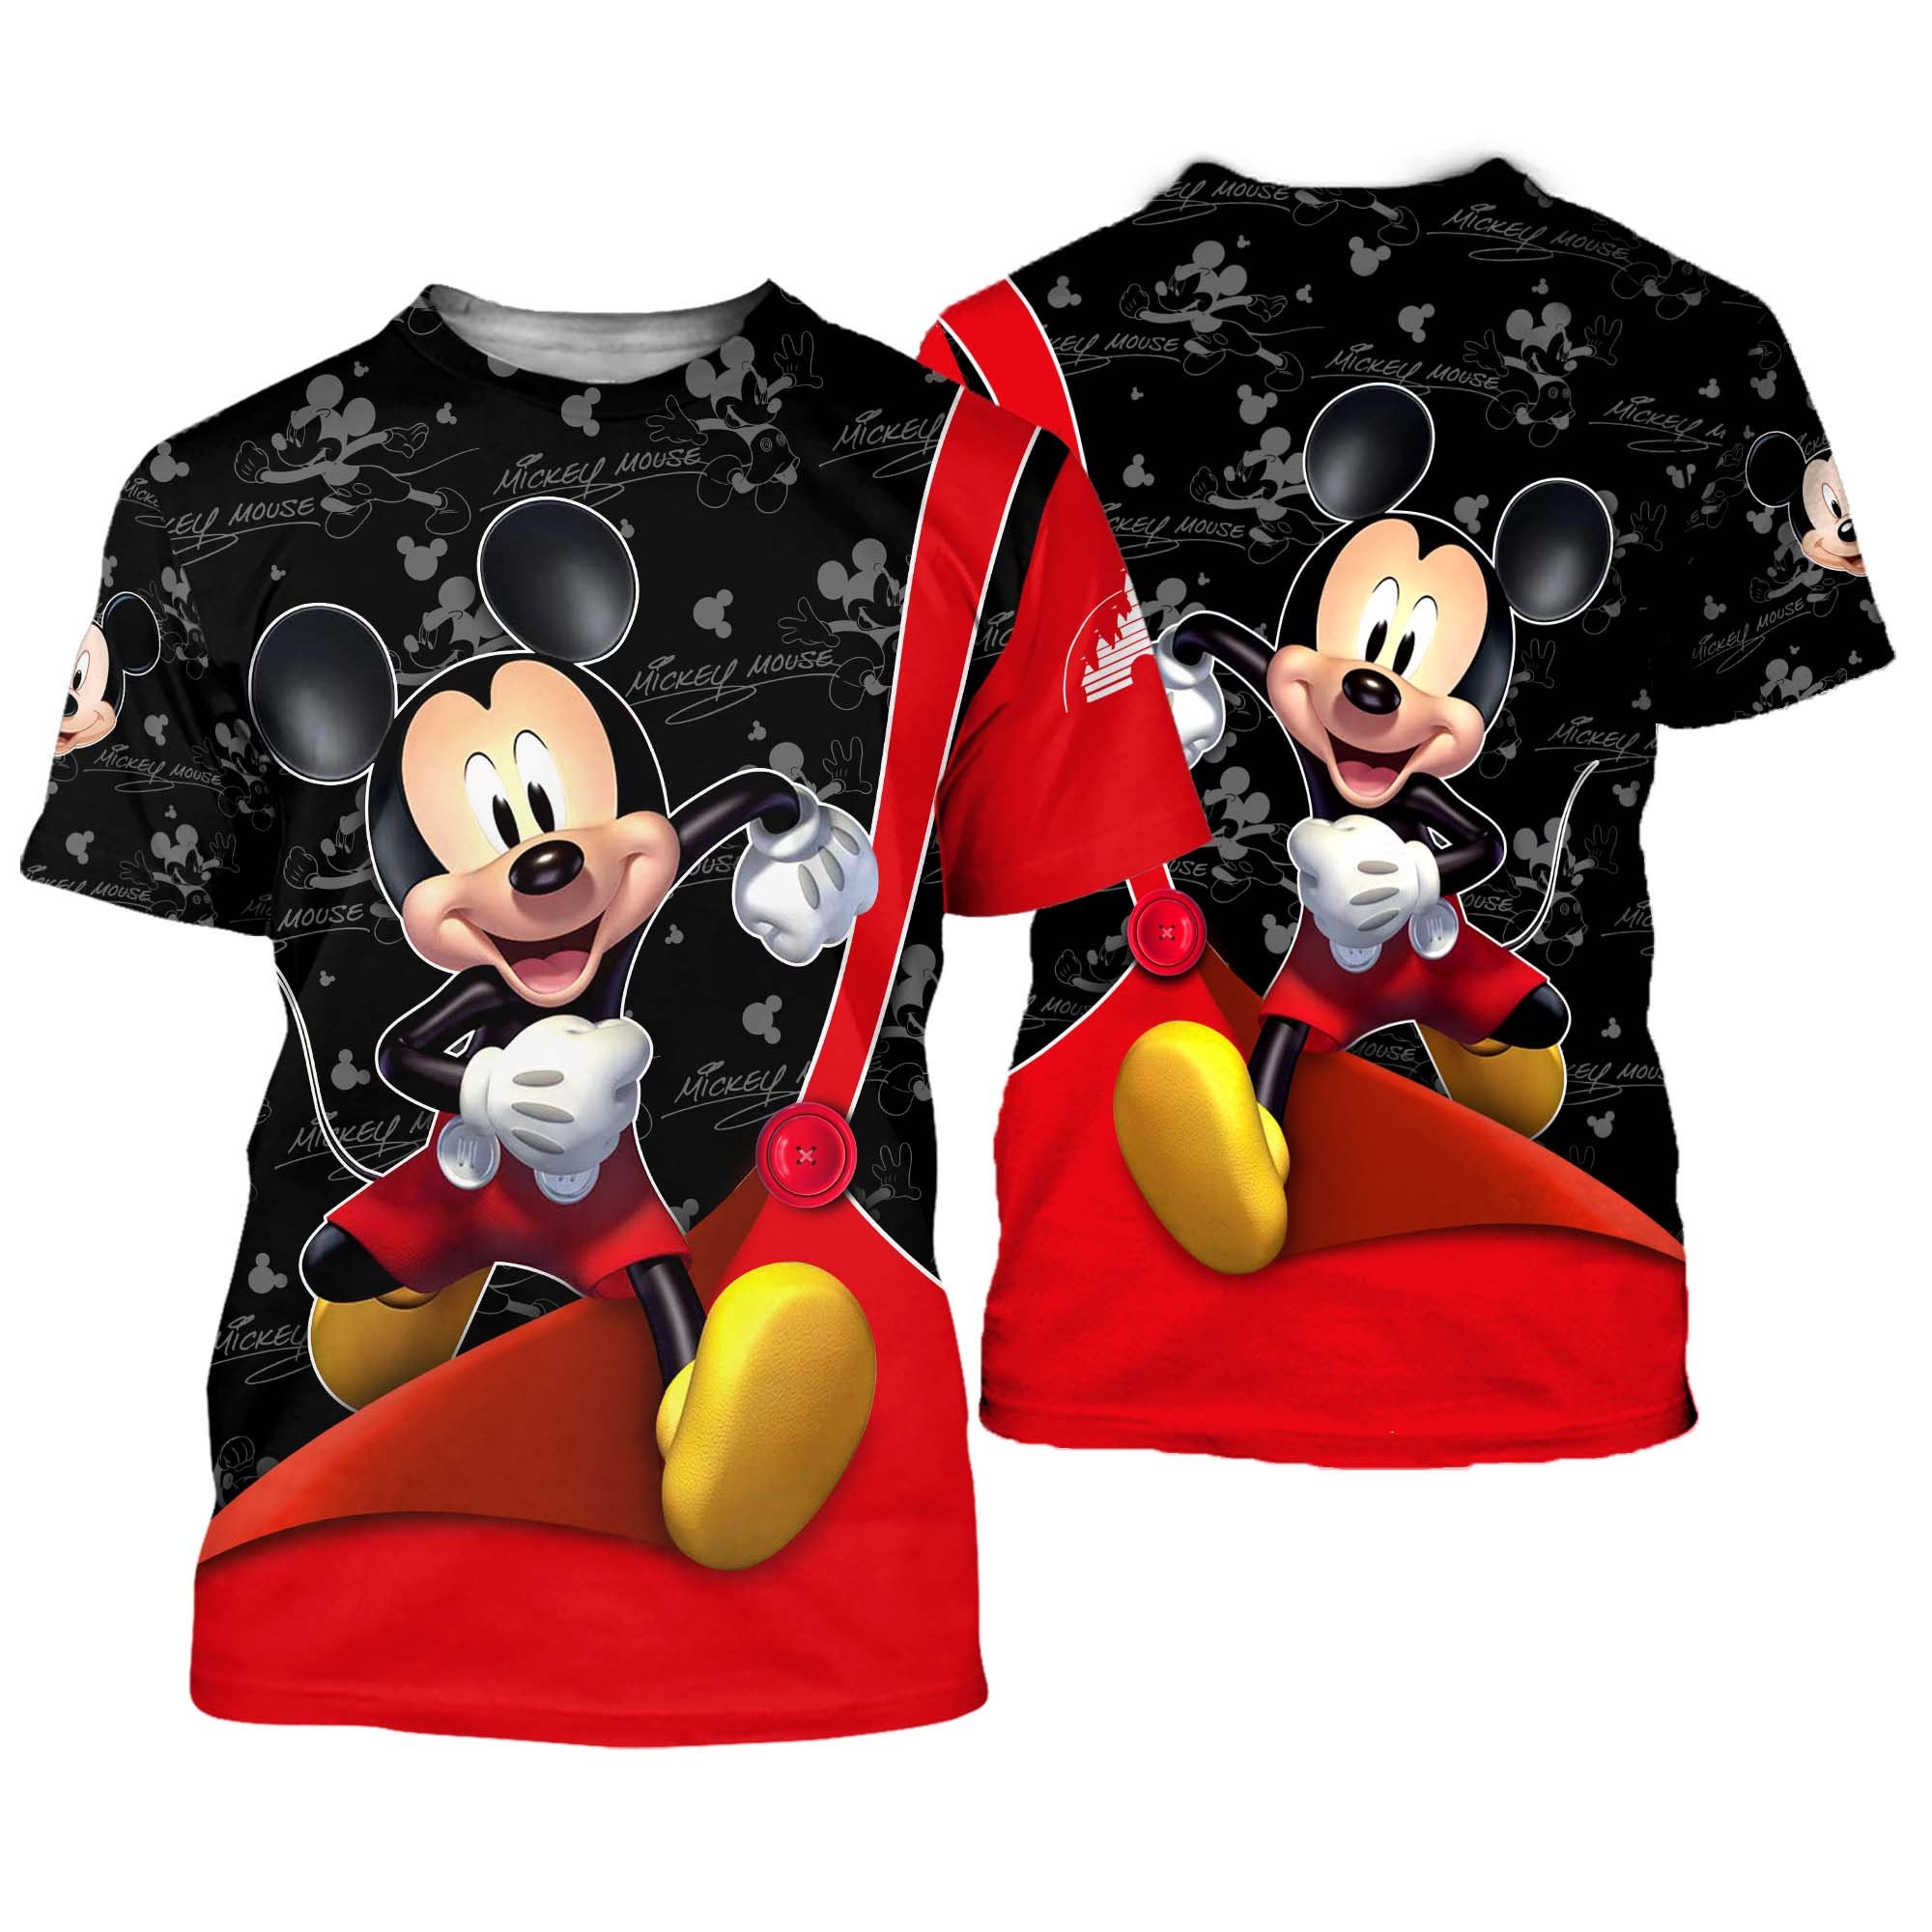 Discover Mickey Red Black Button Overalls Patterns Disney Cartoon 3D T-shirts